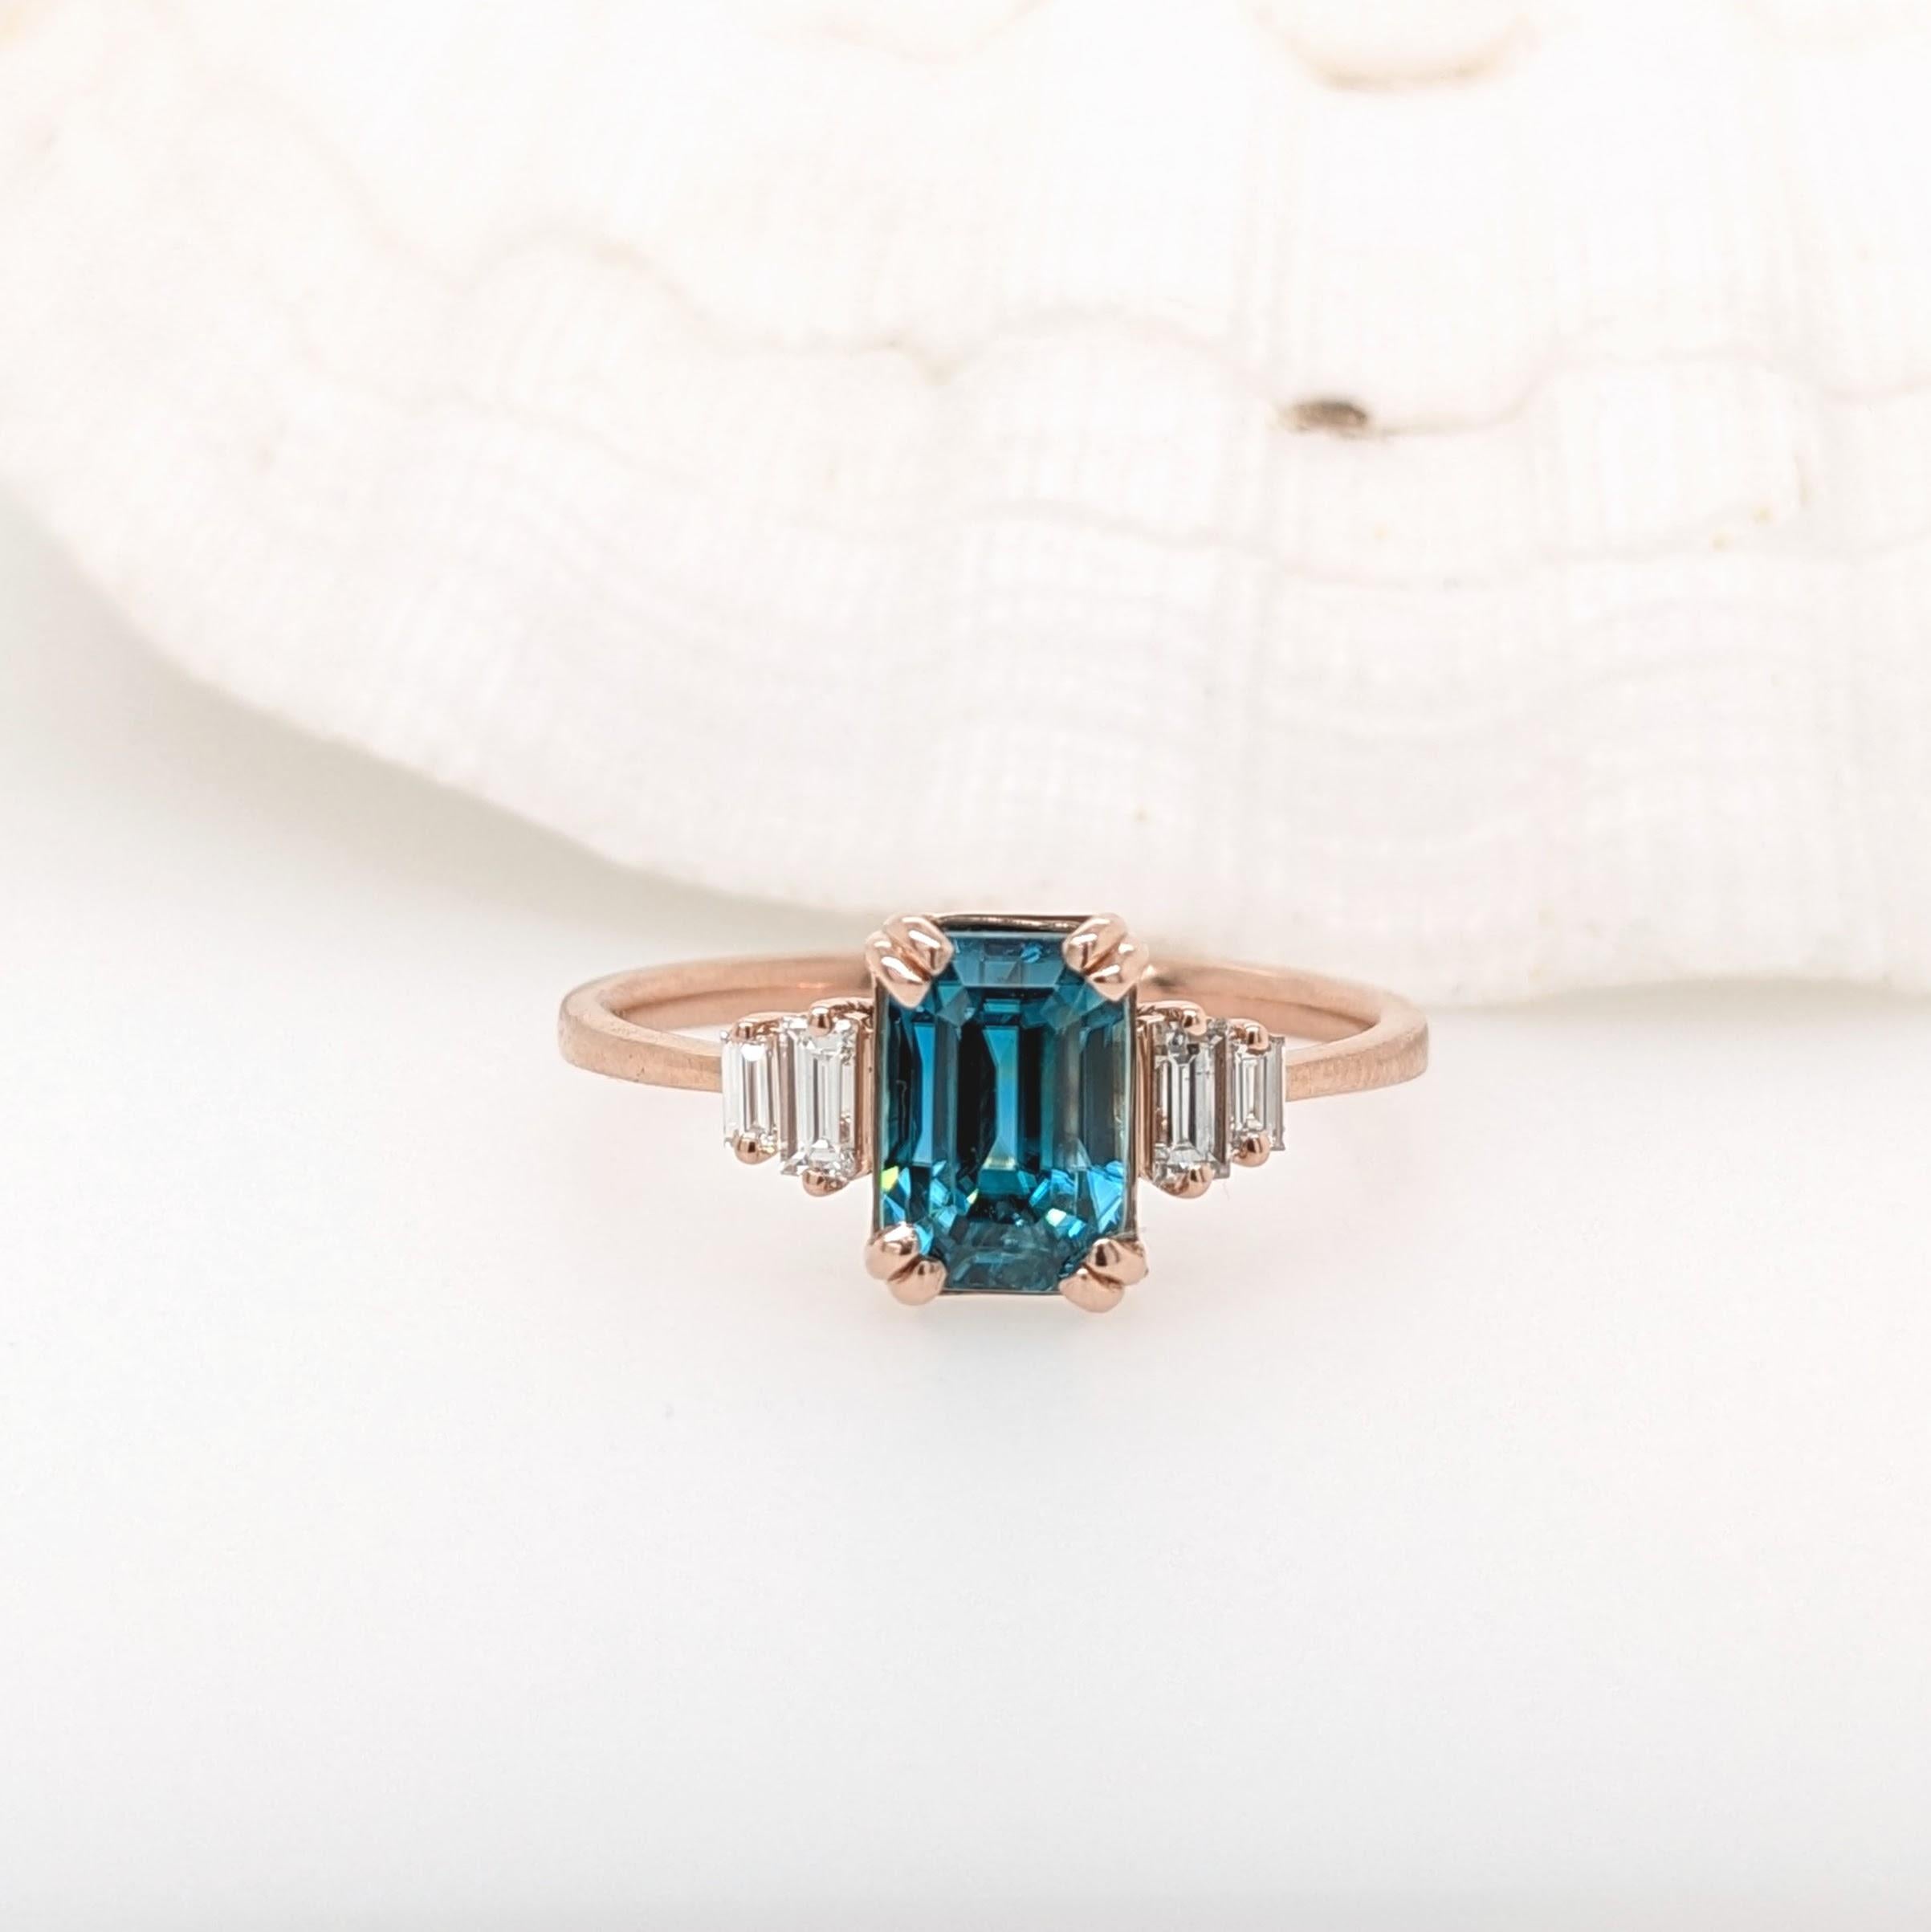 This statement ring features a gorgeous sparkling natural blue Zircon in 14K solid rose Gold with beautiful baguette diamond accents giving it an elegant modern feel. Zircons are celebrated for a refractive index that comes closest to diamonds,